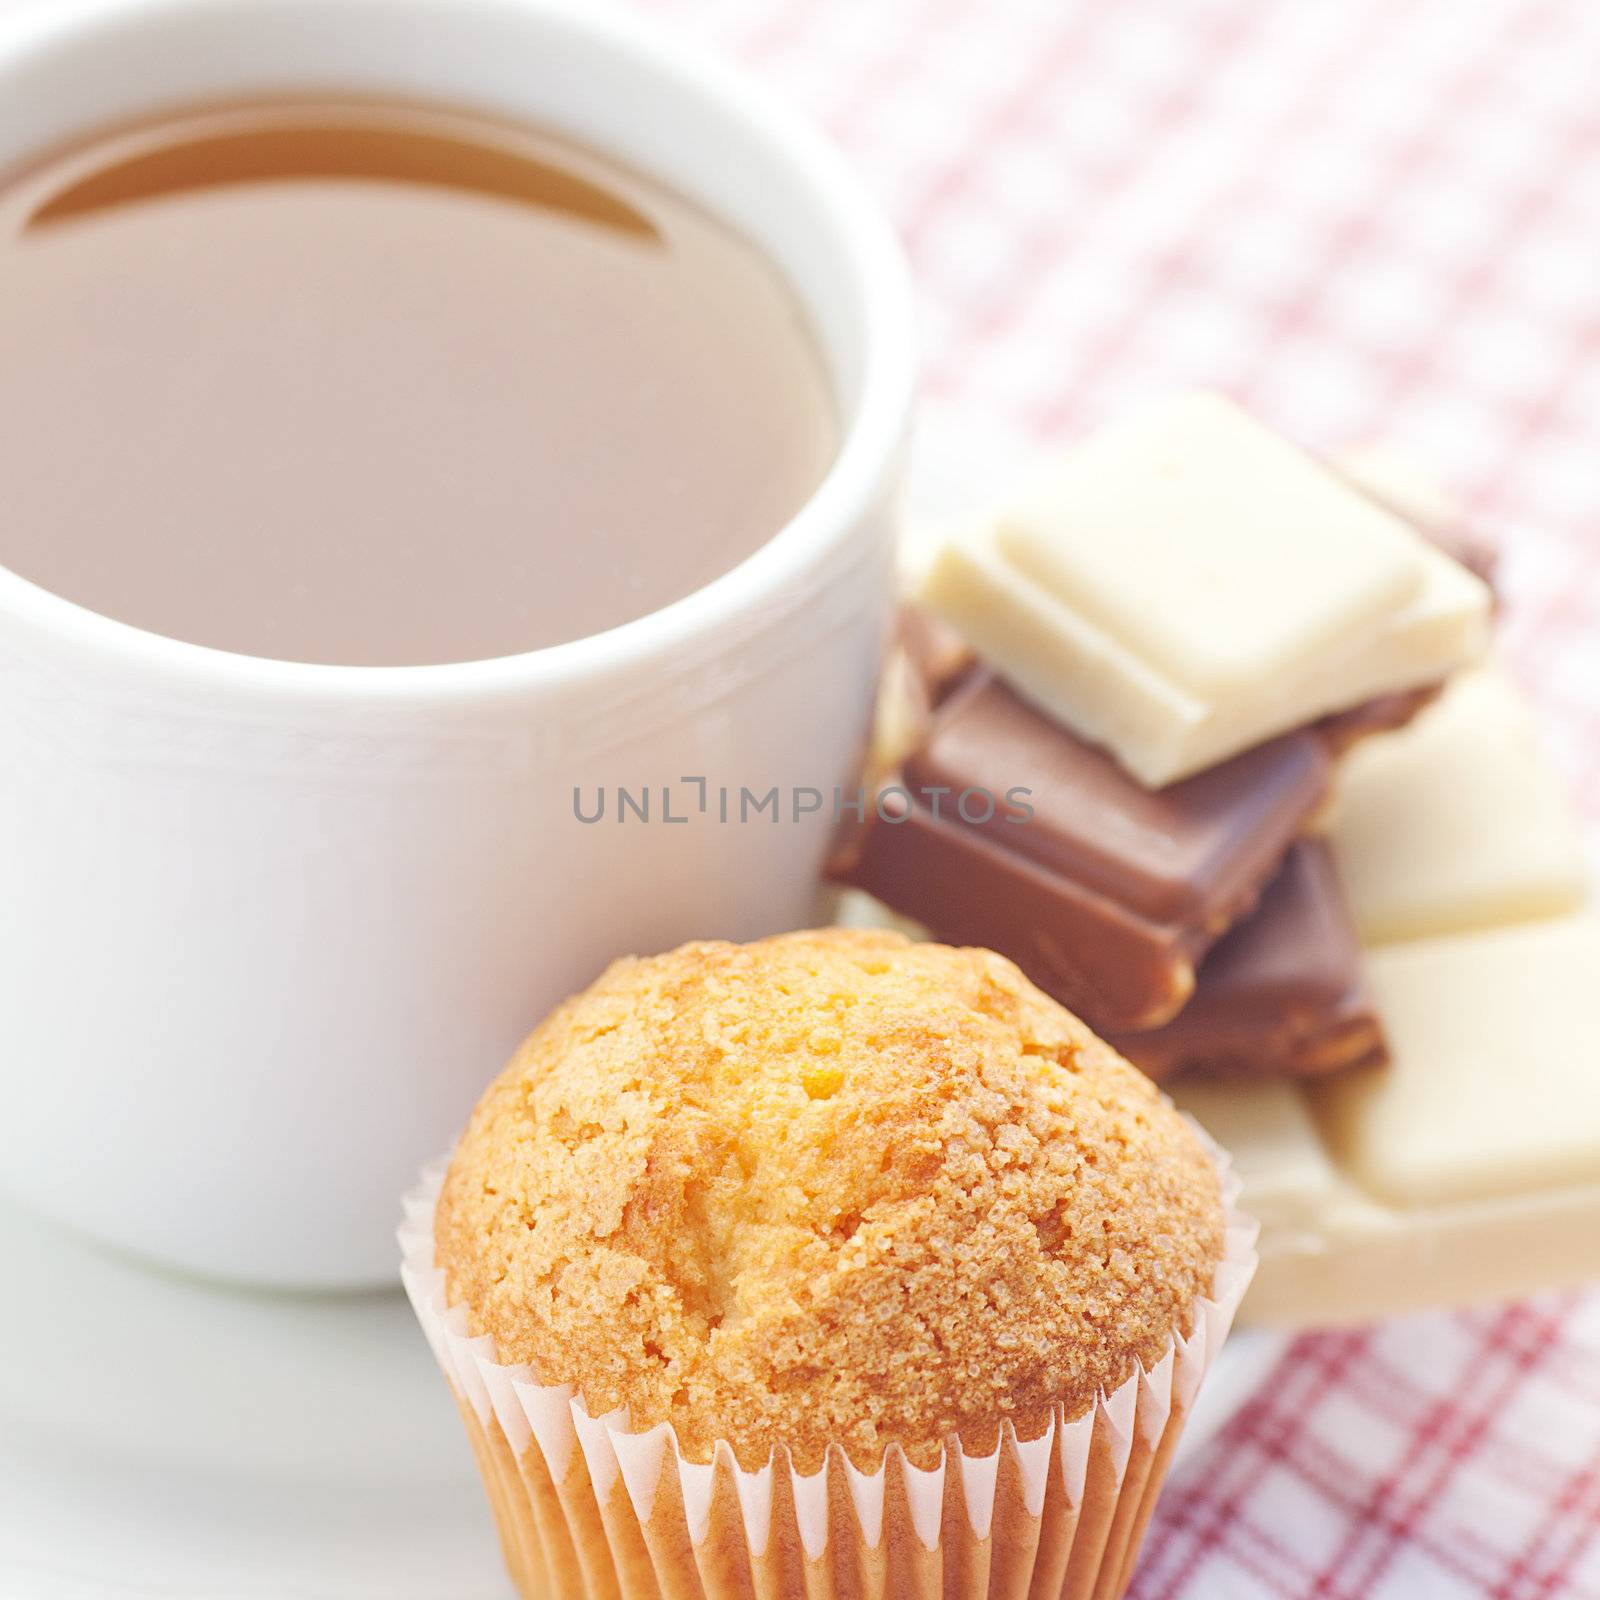 bar of chocolate,tea and muffin on plaid fabric by jannyjus